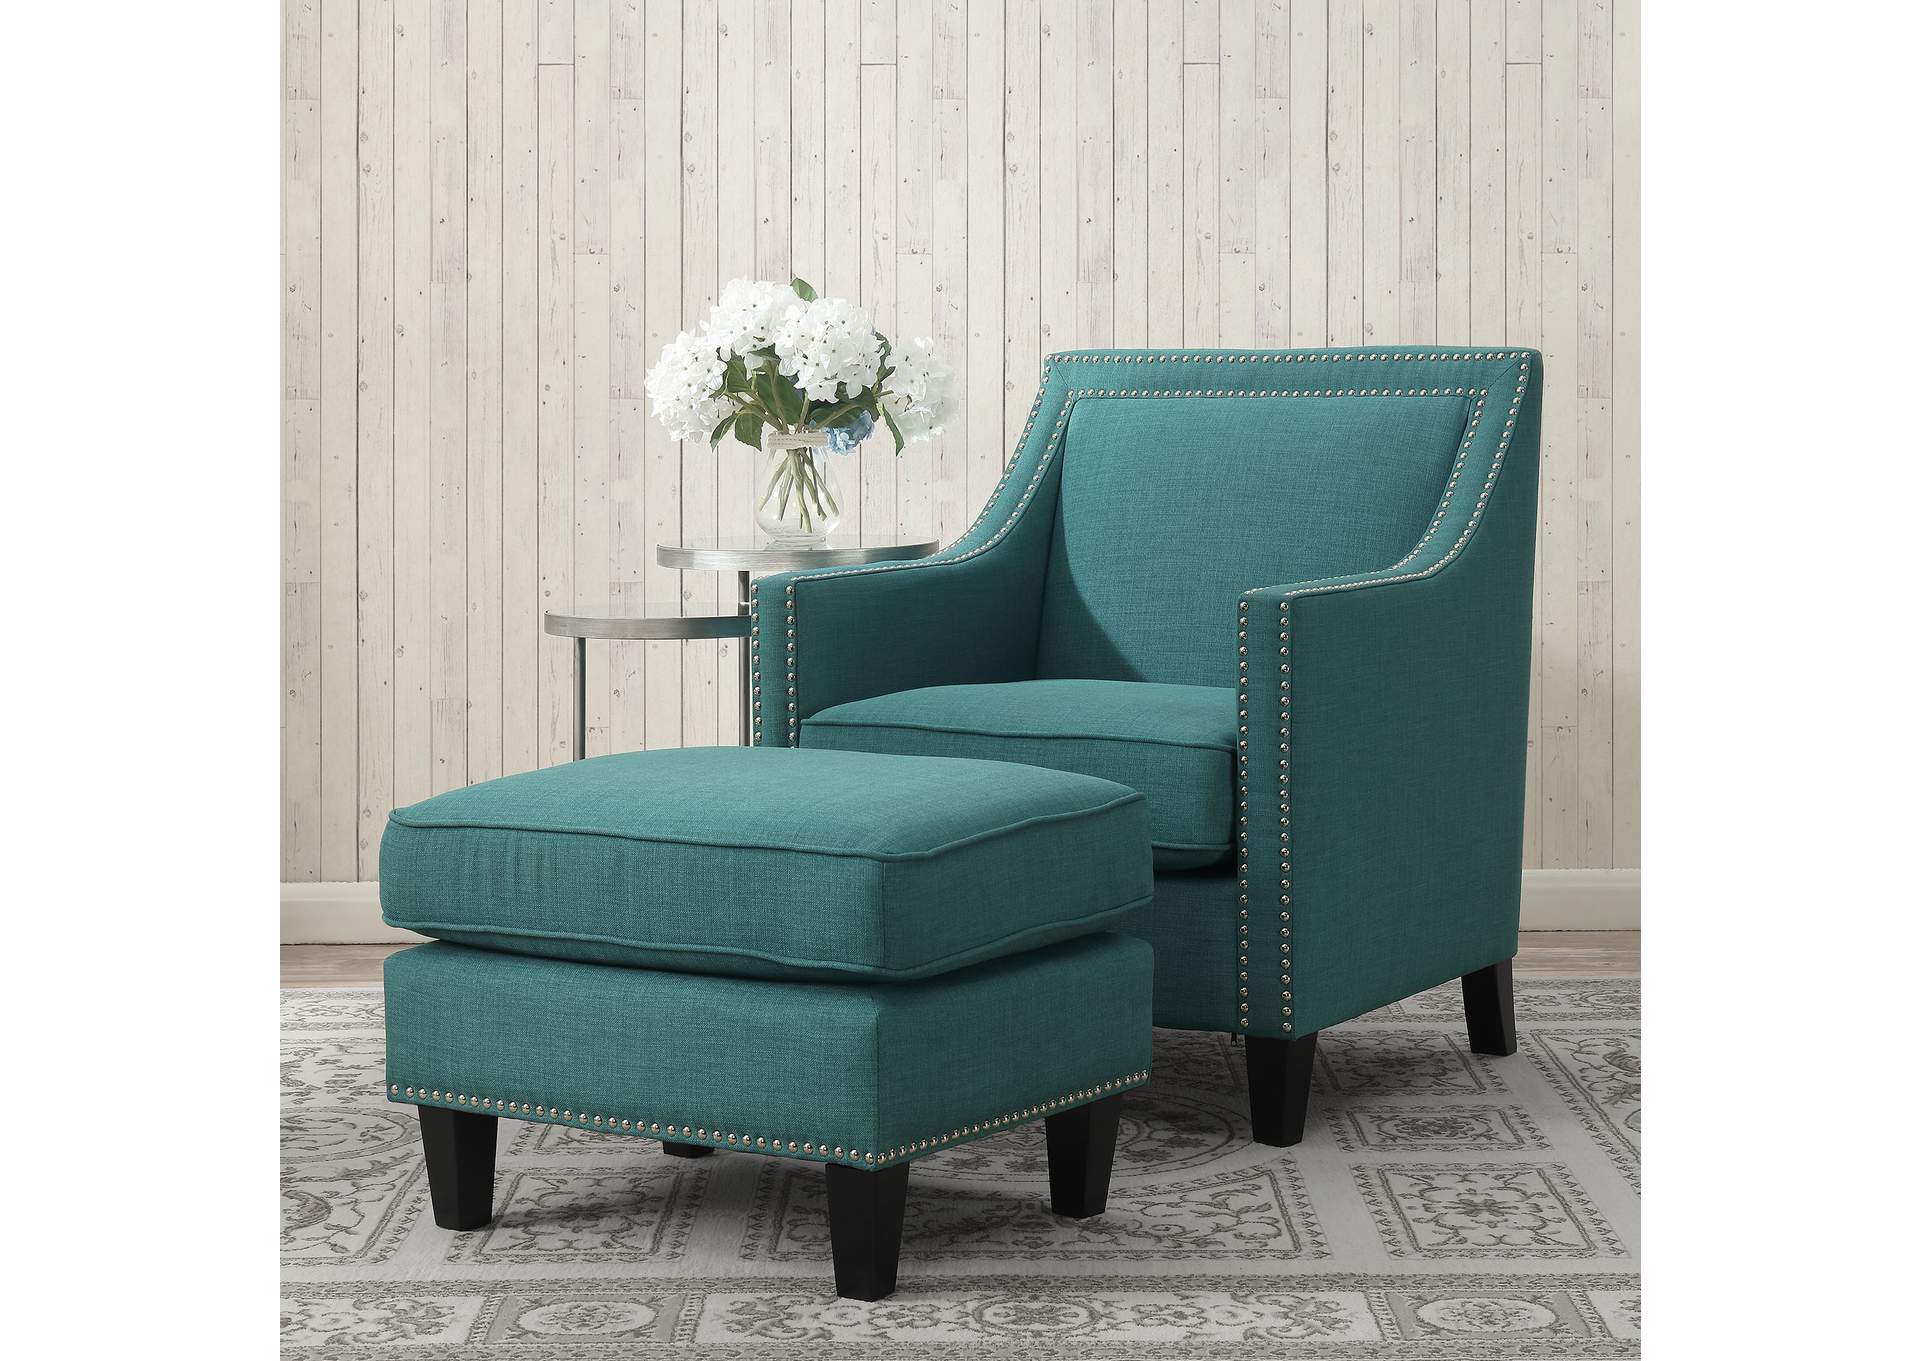 Erica 497 Ottoman With Chrome Nail Heirloome Teal,Elements